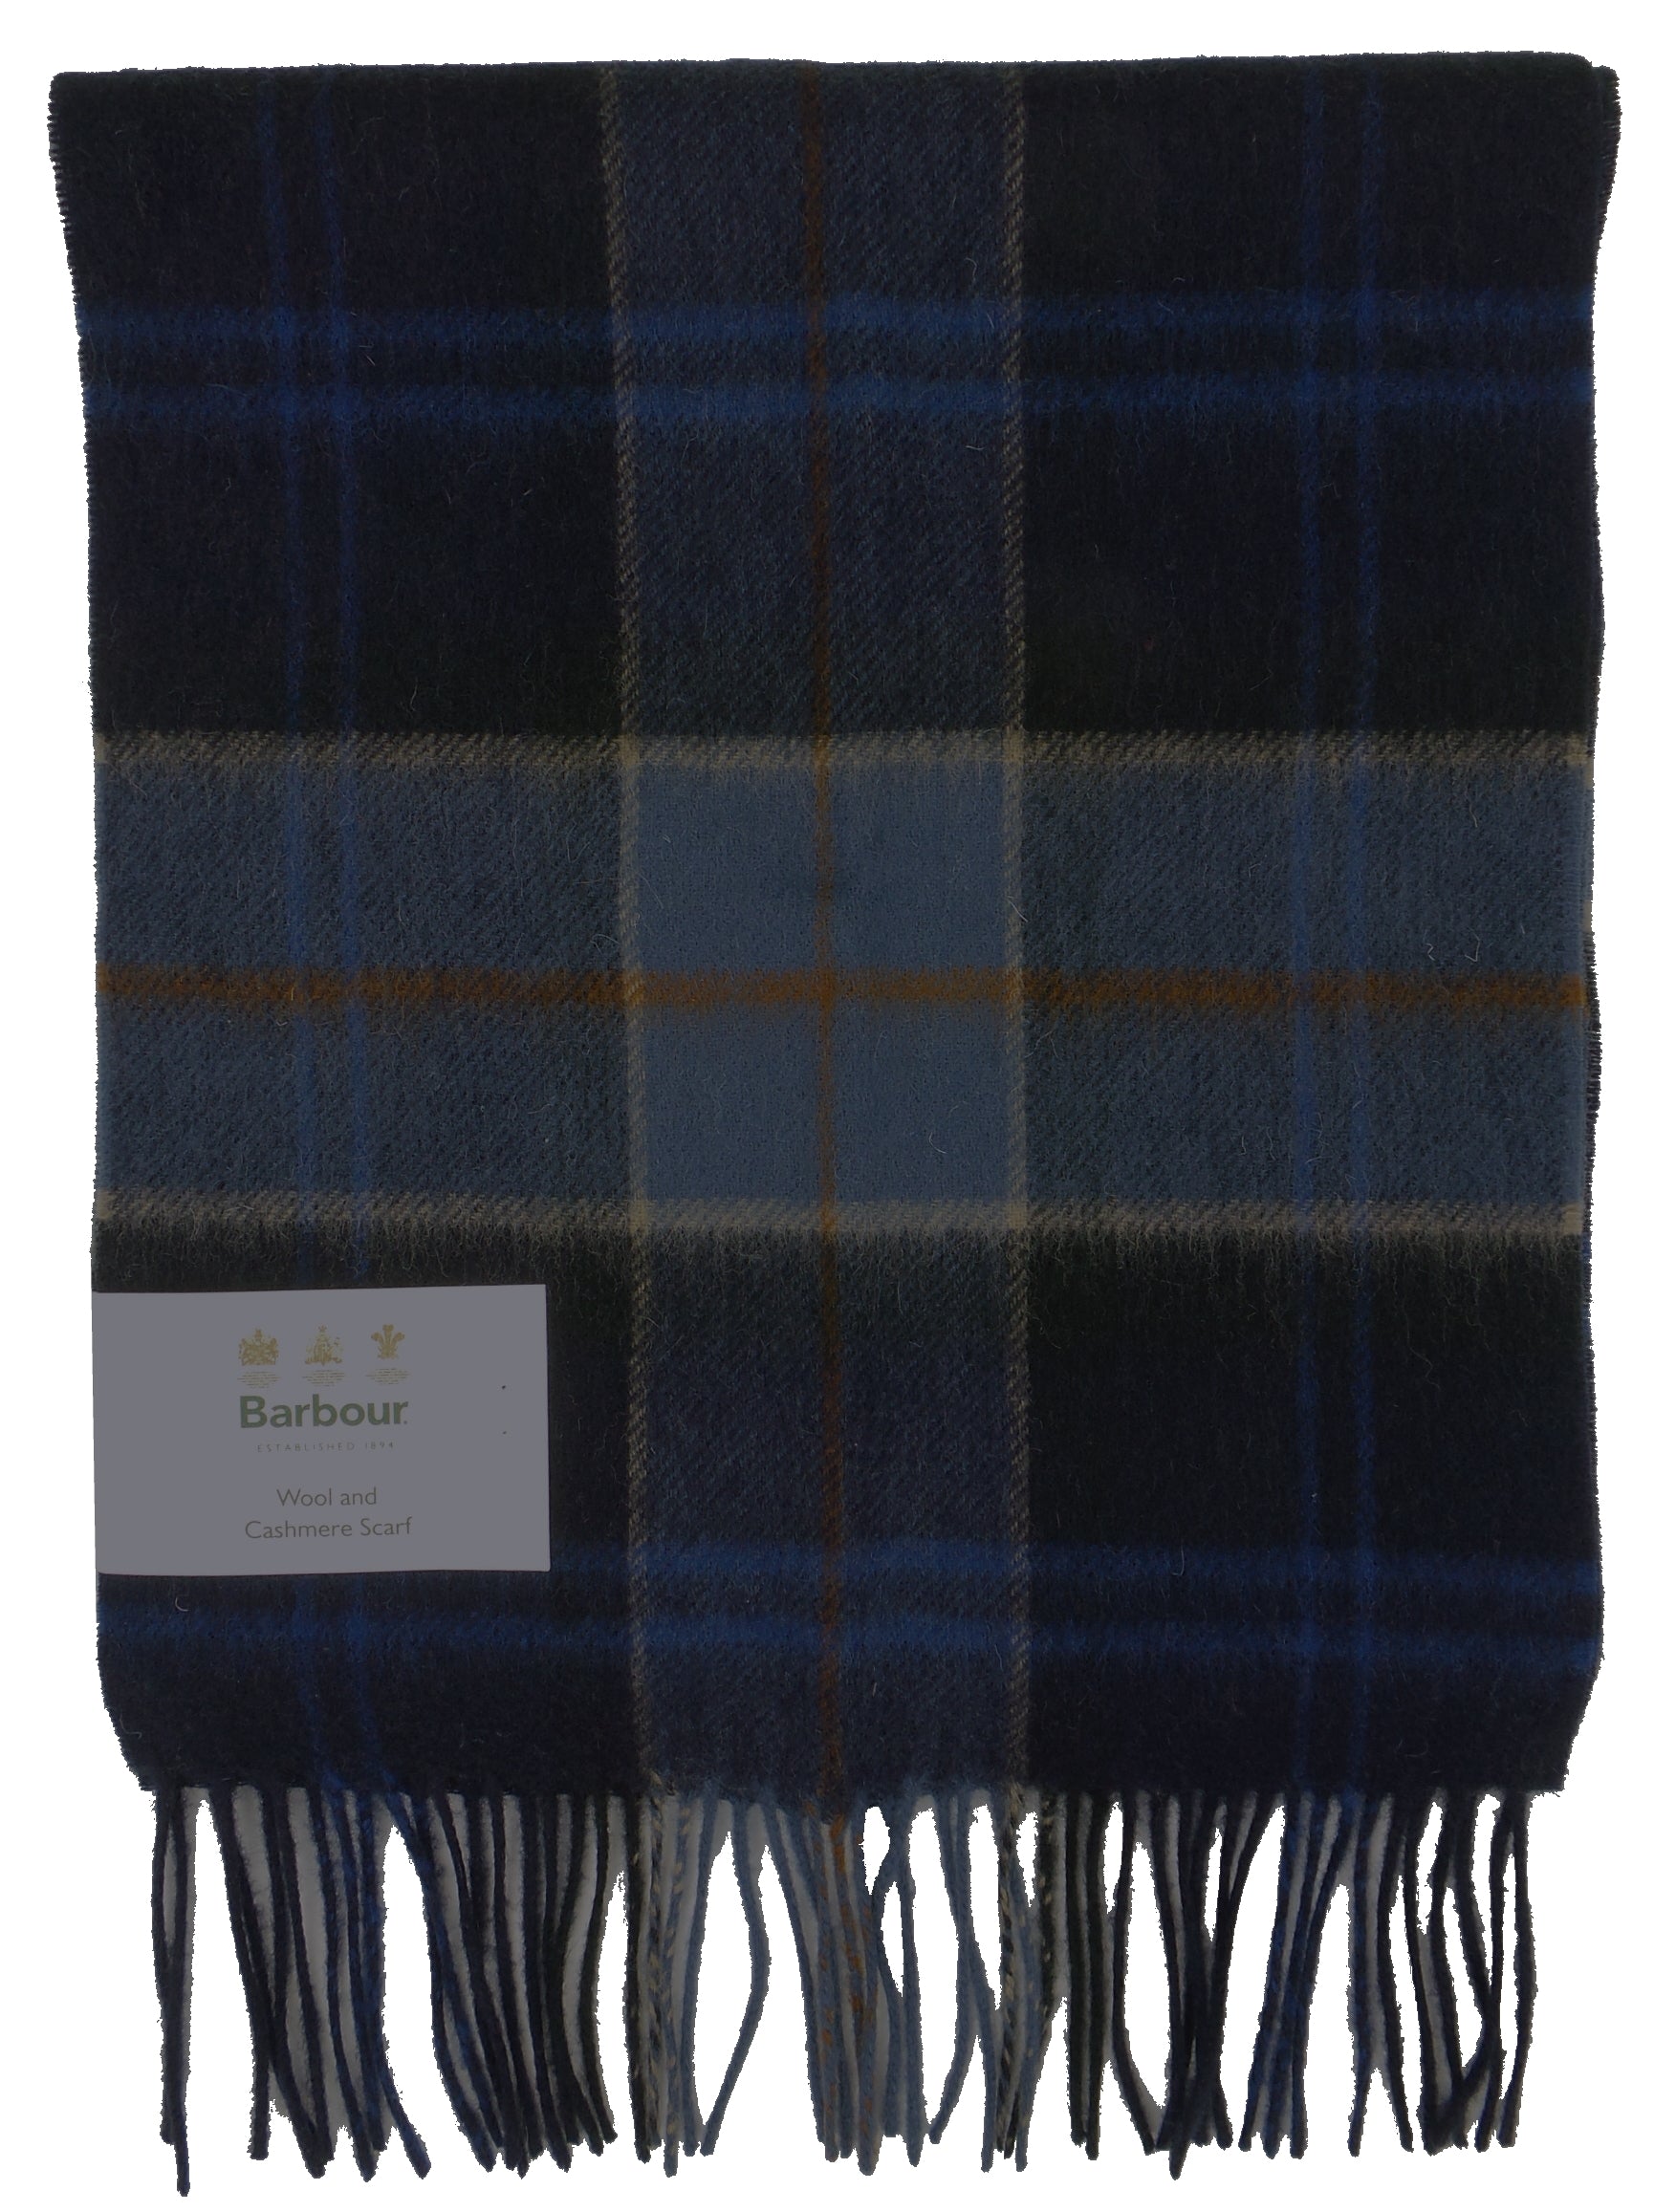 Plaid Scarves, Tartan Scarves, cashmere and lambswool